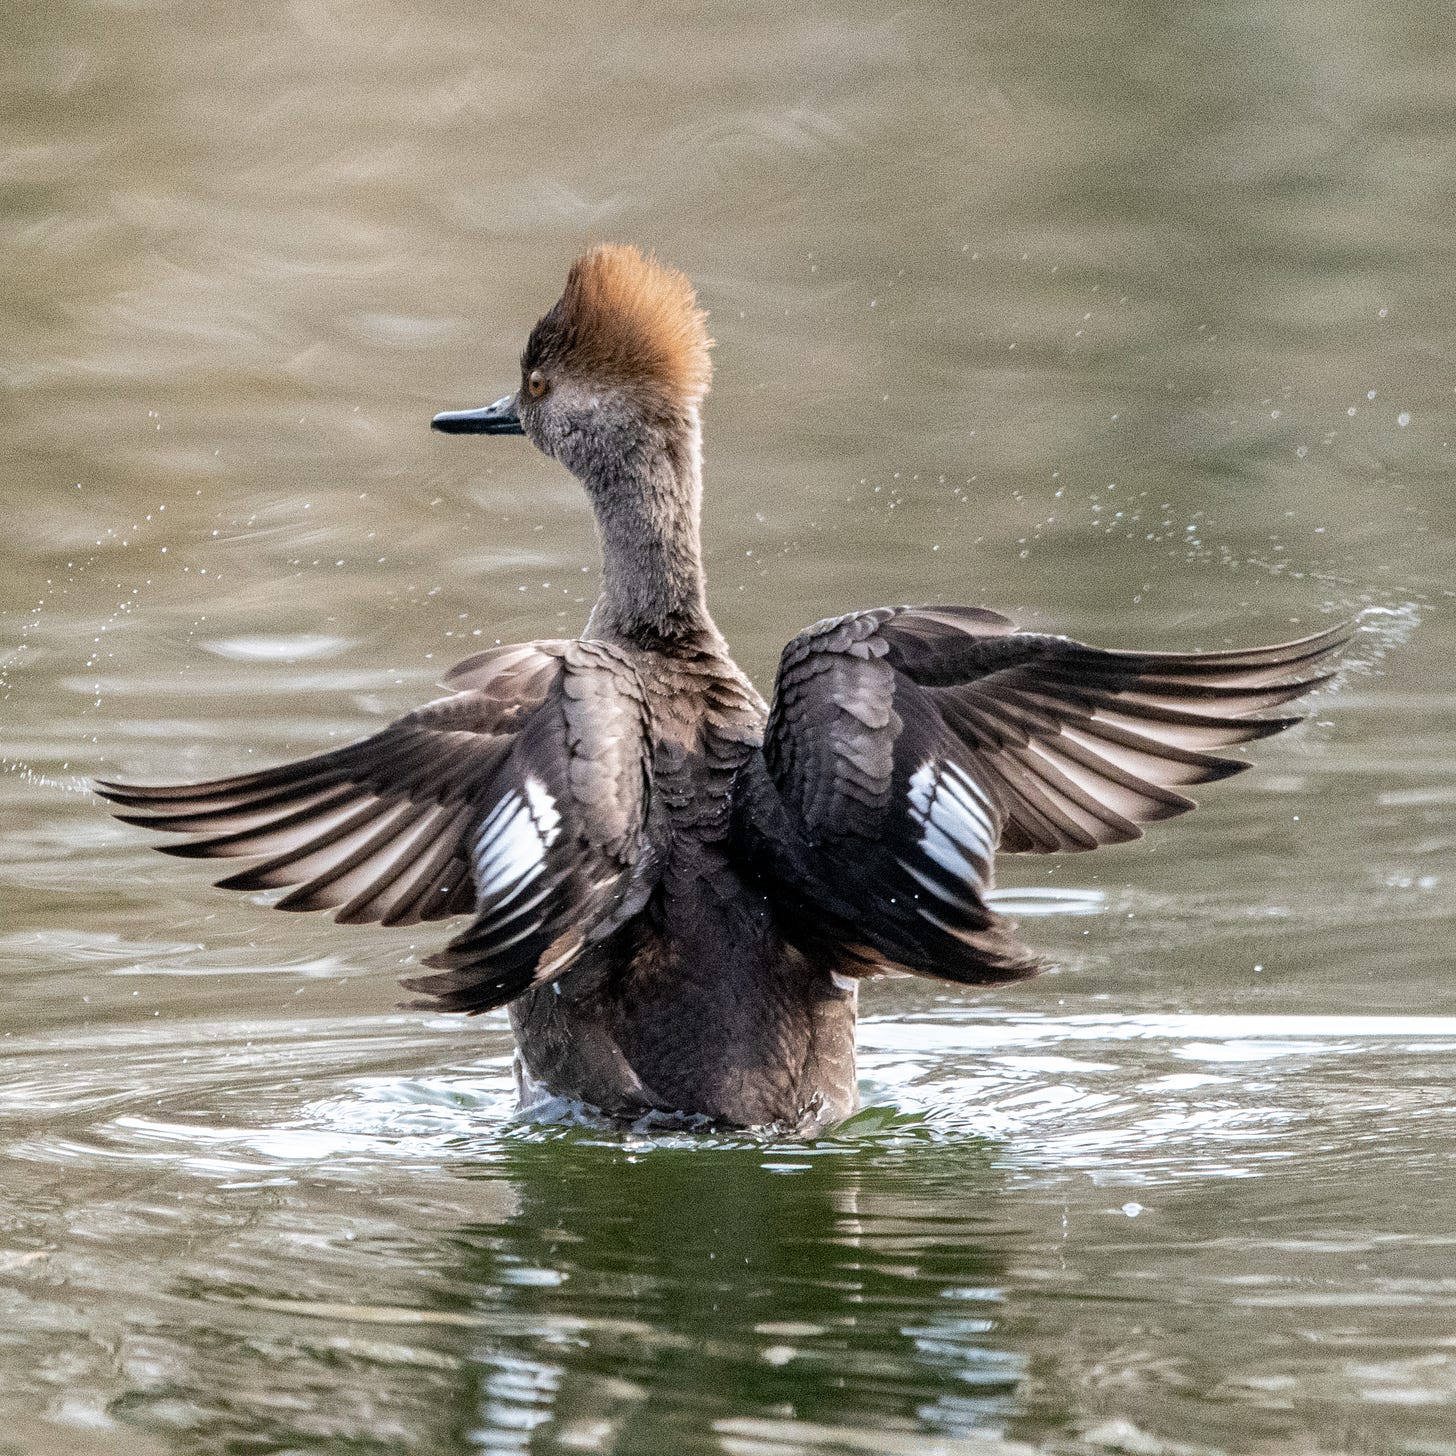 A hooded merganser rises up on its haunches to flap dry its wings